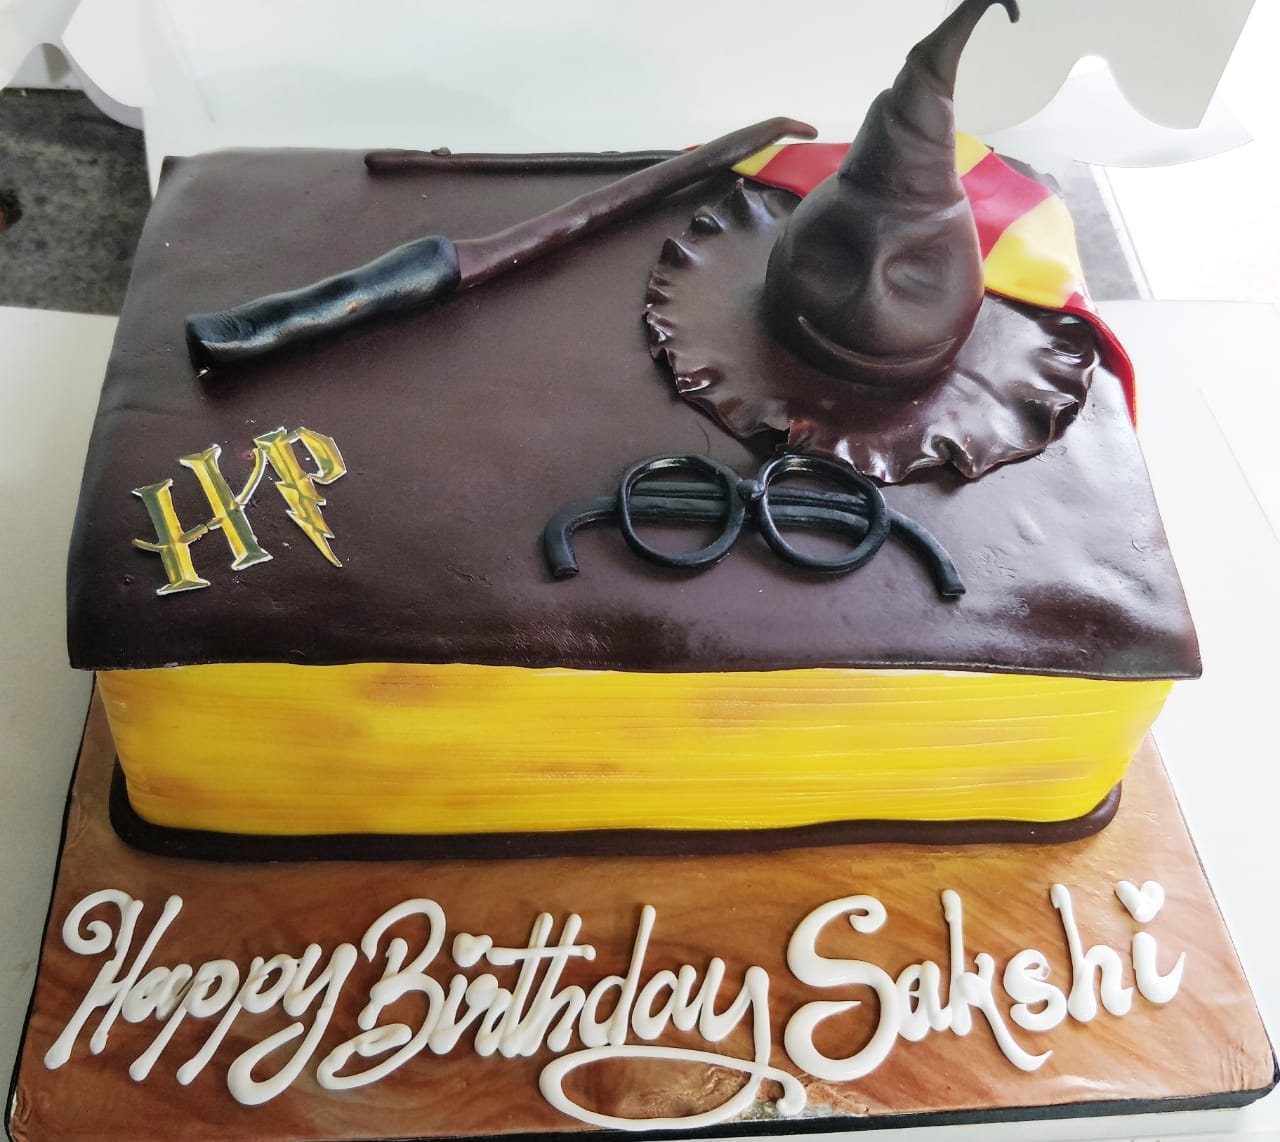 The Sorting Hat Cake